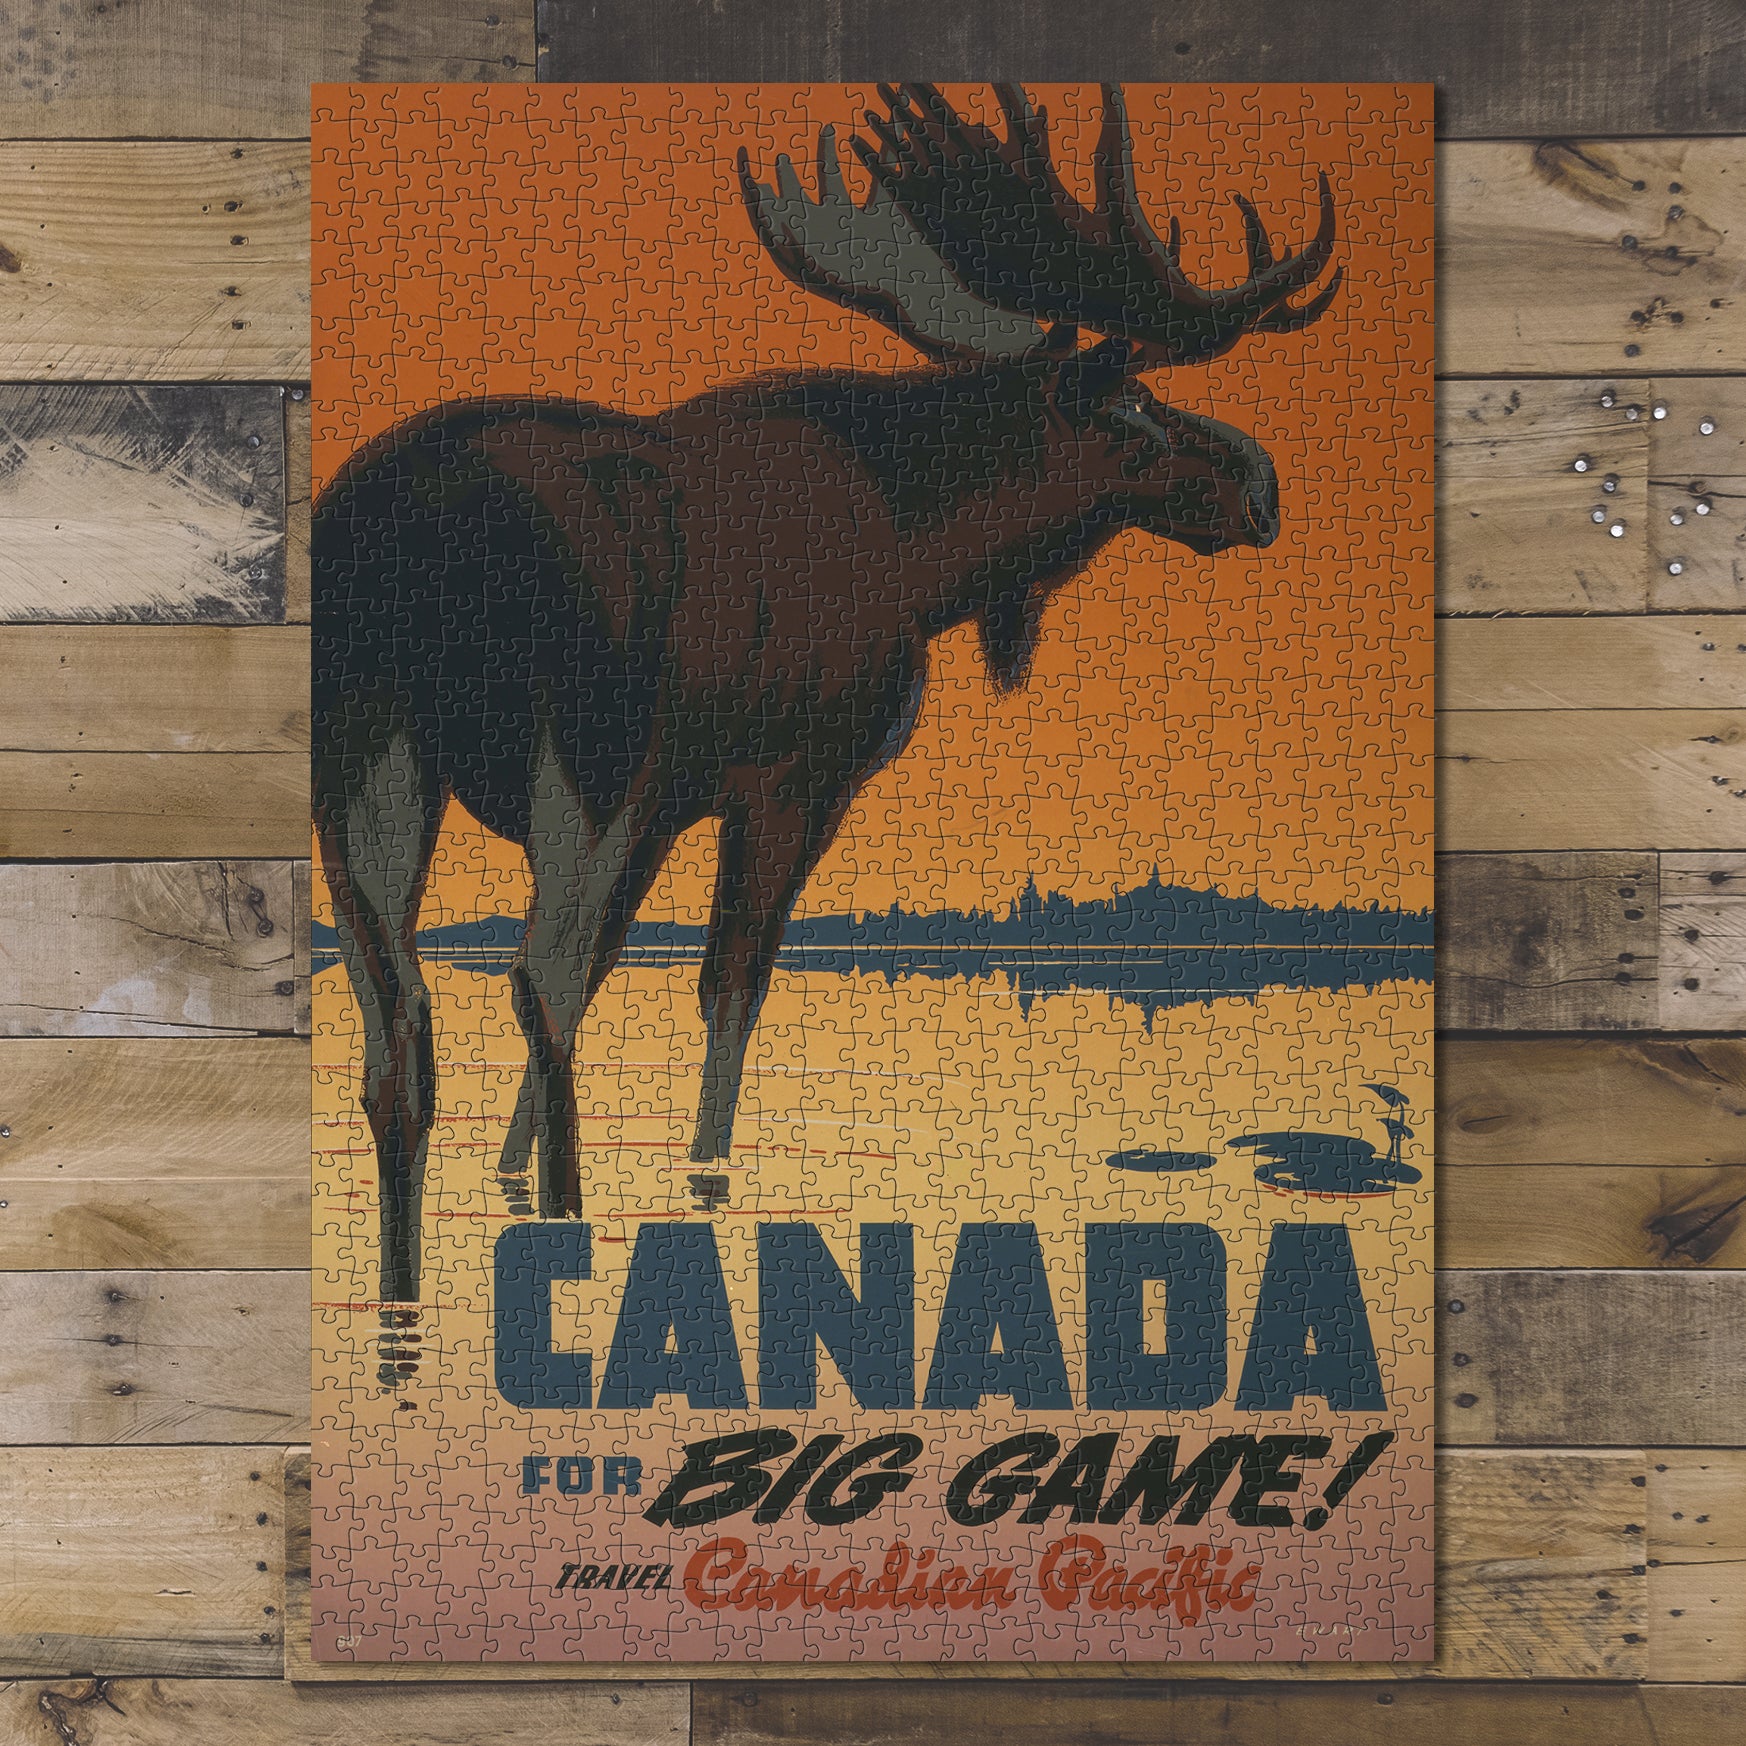 1000 piece puzzle Photo: Canada for big game! Travel Canadian Pacific Birthday Present Gifts